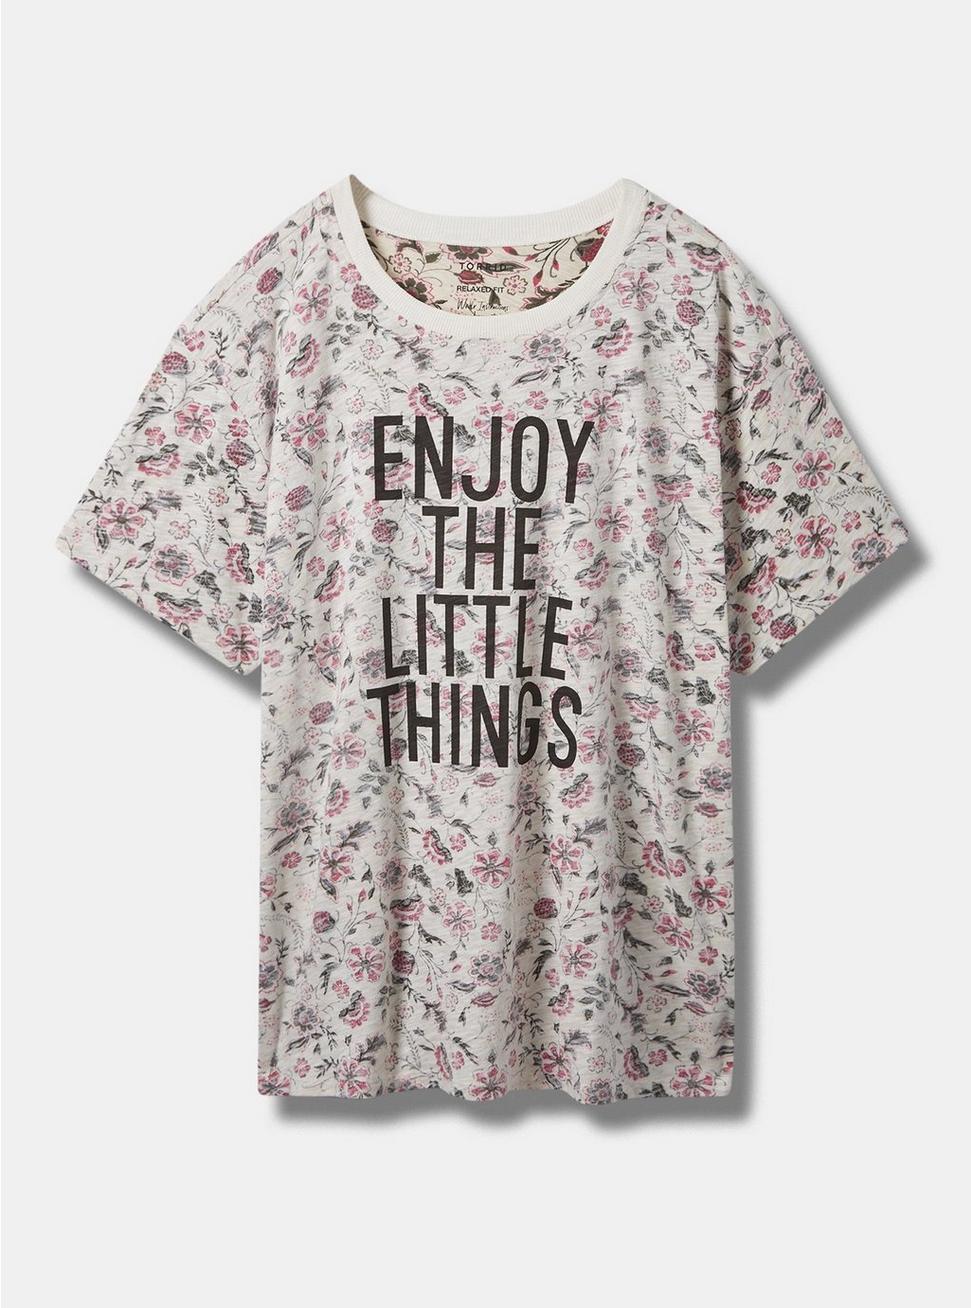 Enjoy The Little Things Relaxed Fit Cotton Crew Neck Tee, MULTI FLORAL, hi-res